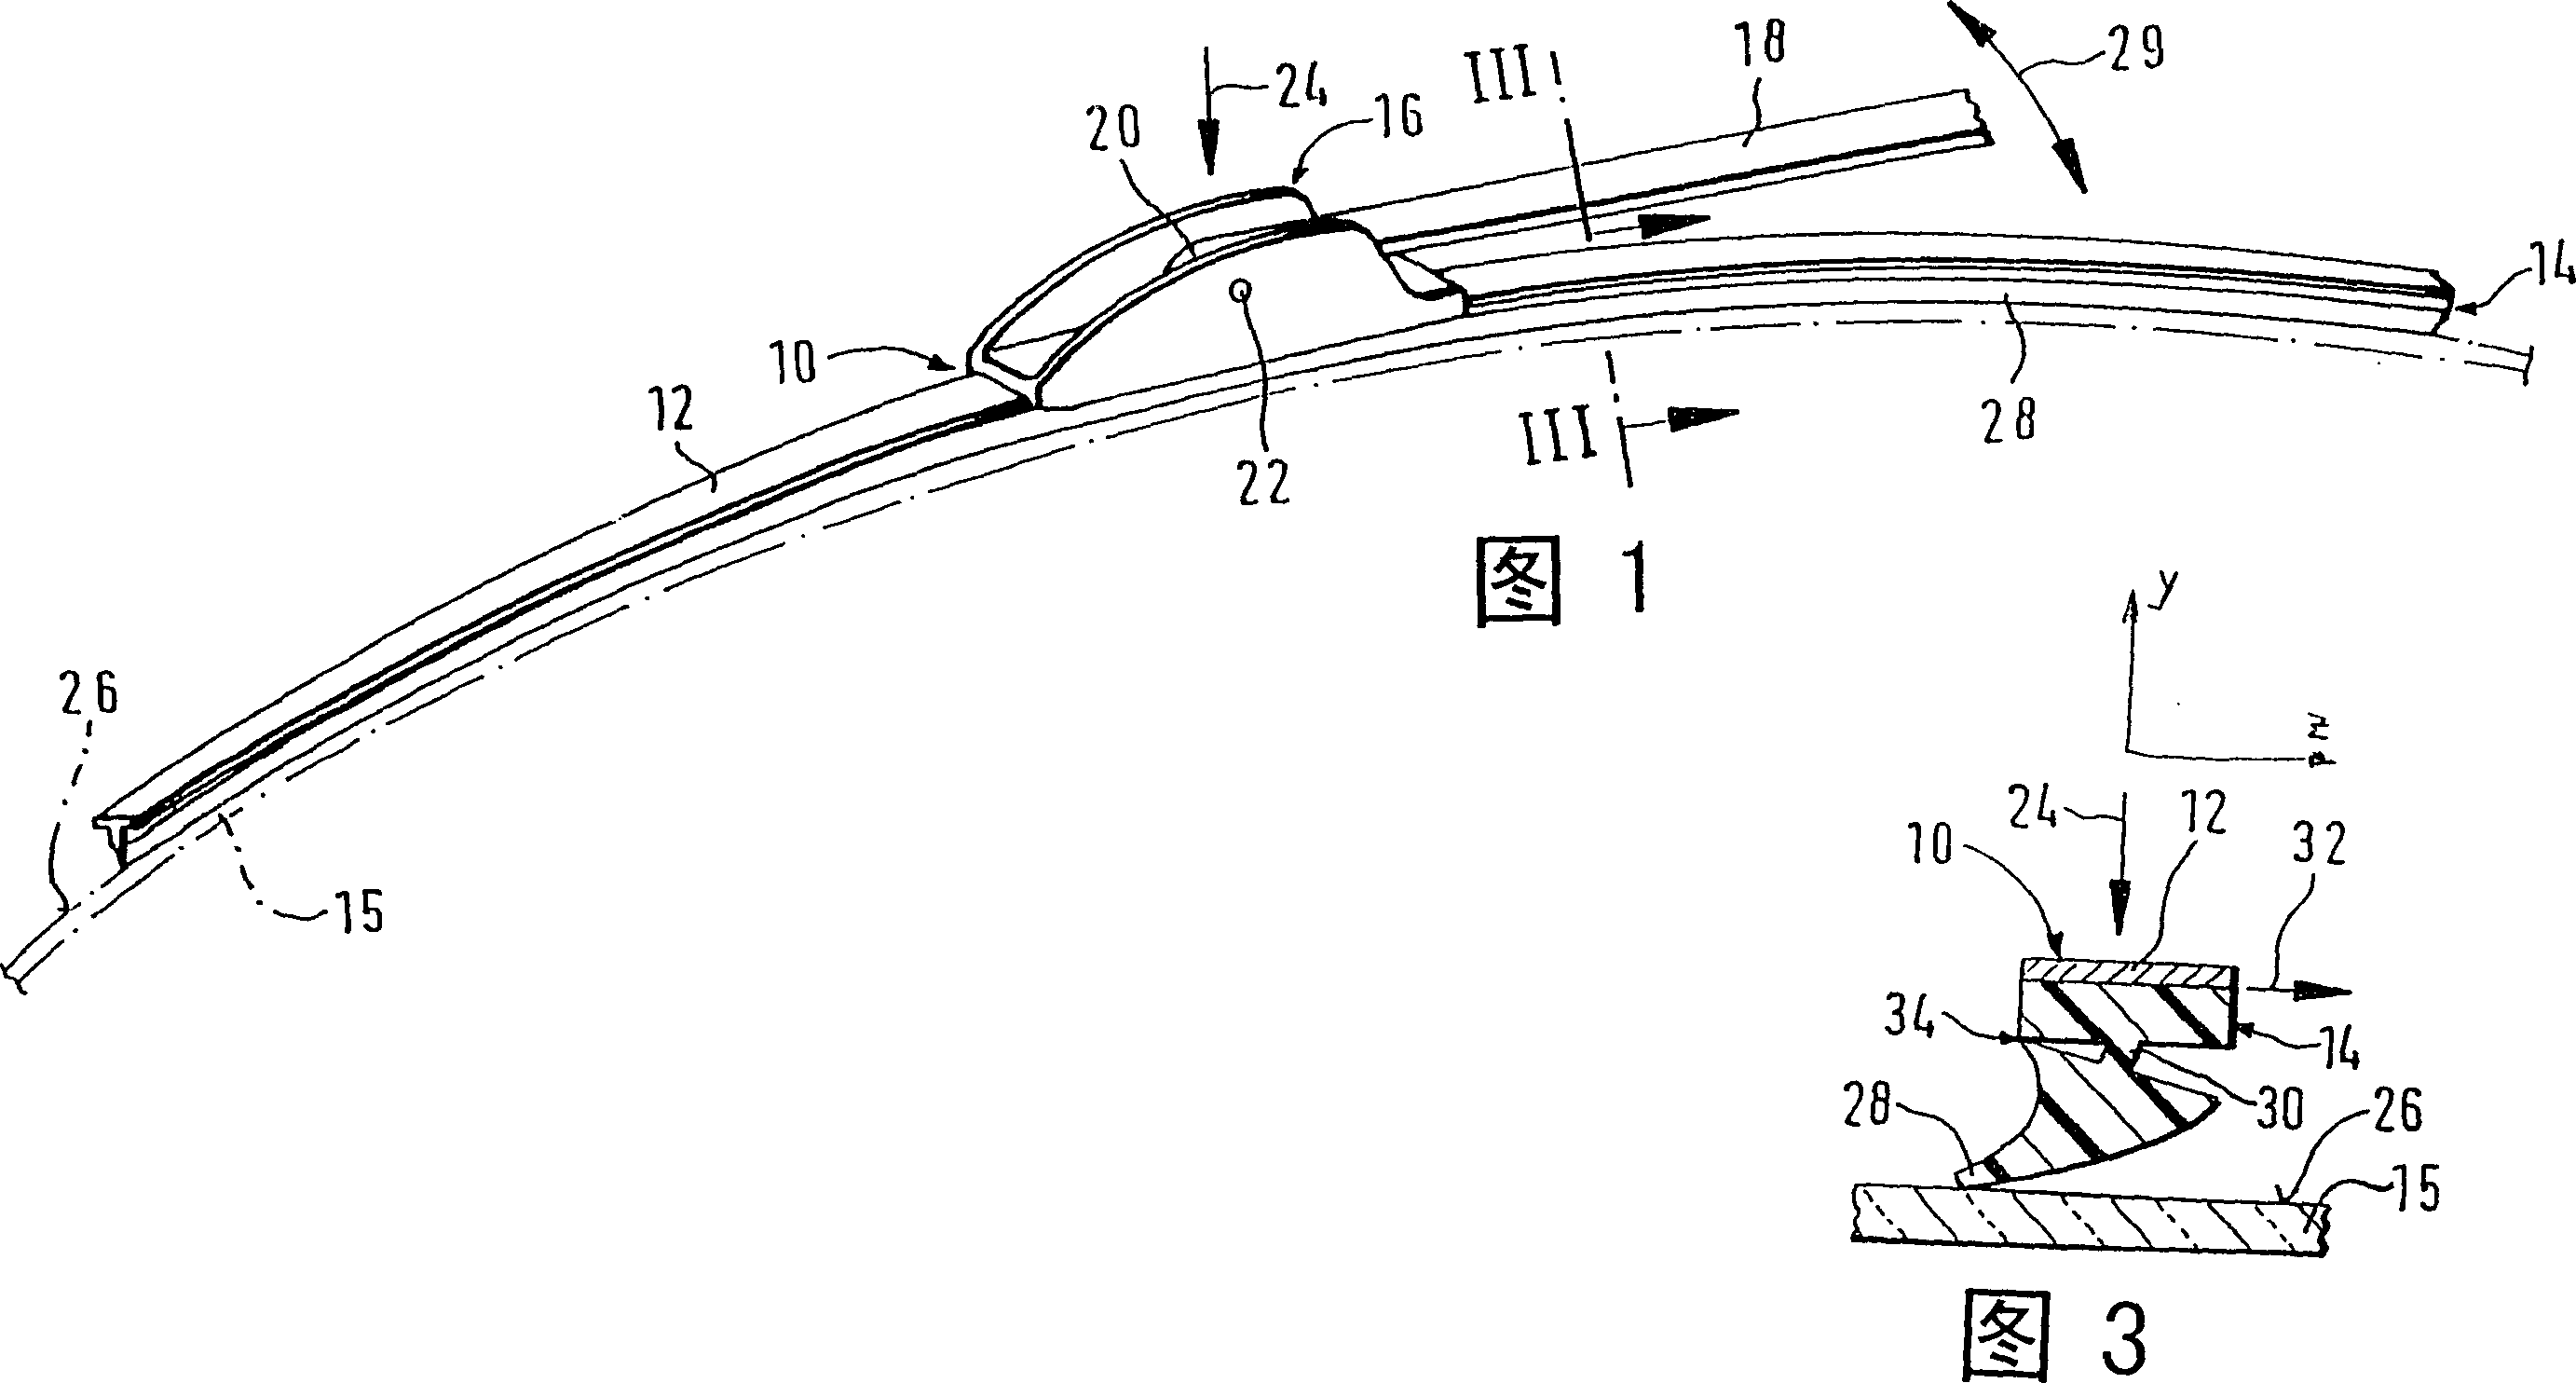 Wiper blade for windshields, erpecially automobile windshields, and method for production thereof